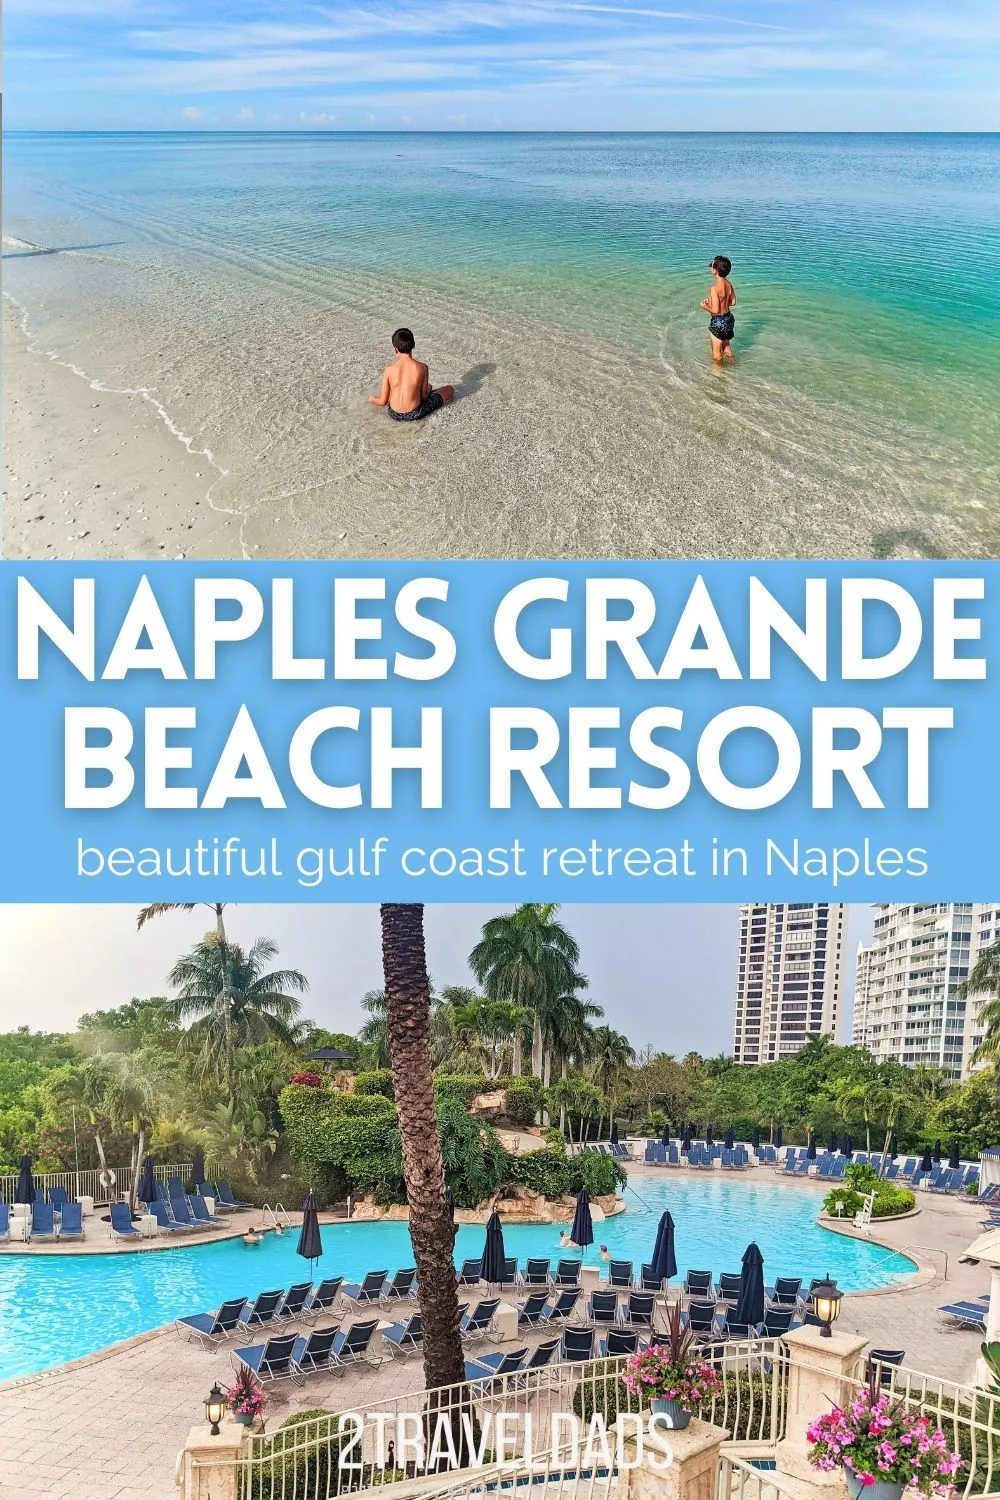 The Naples Grande Beach Resort is ideal for a Gulf Coast trip, located just off the beach with paddling, pools and more directly at the property. Complete beach resort review with tips for planning a trip to Naples, Florida.